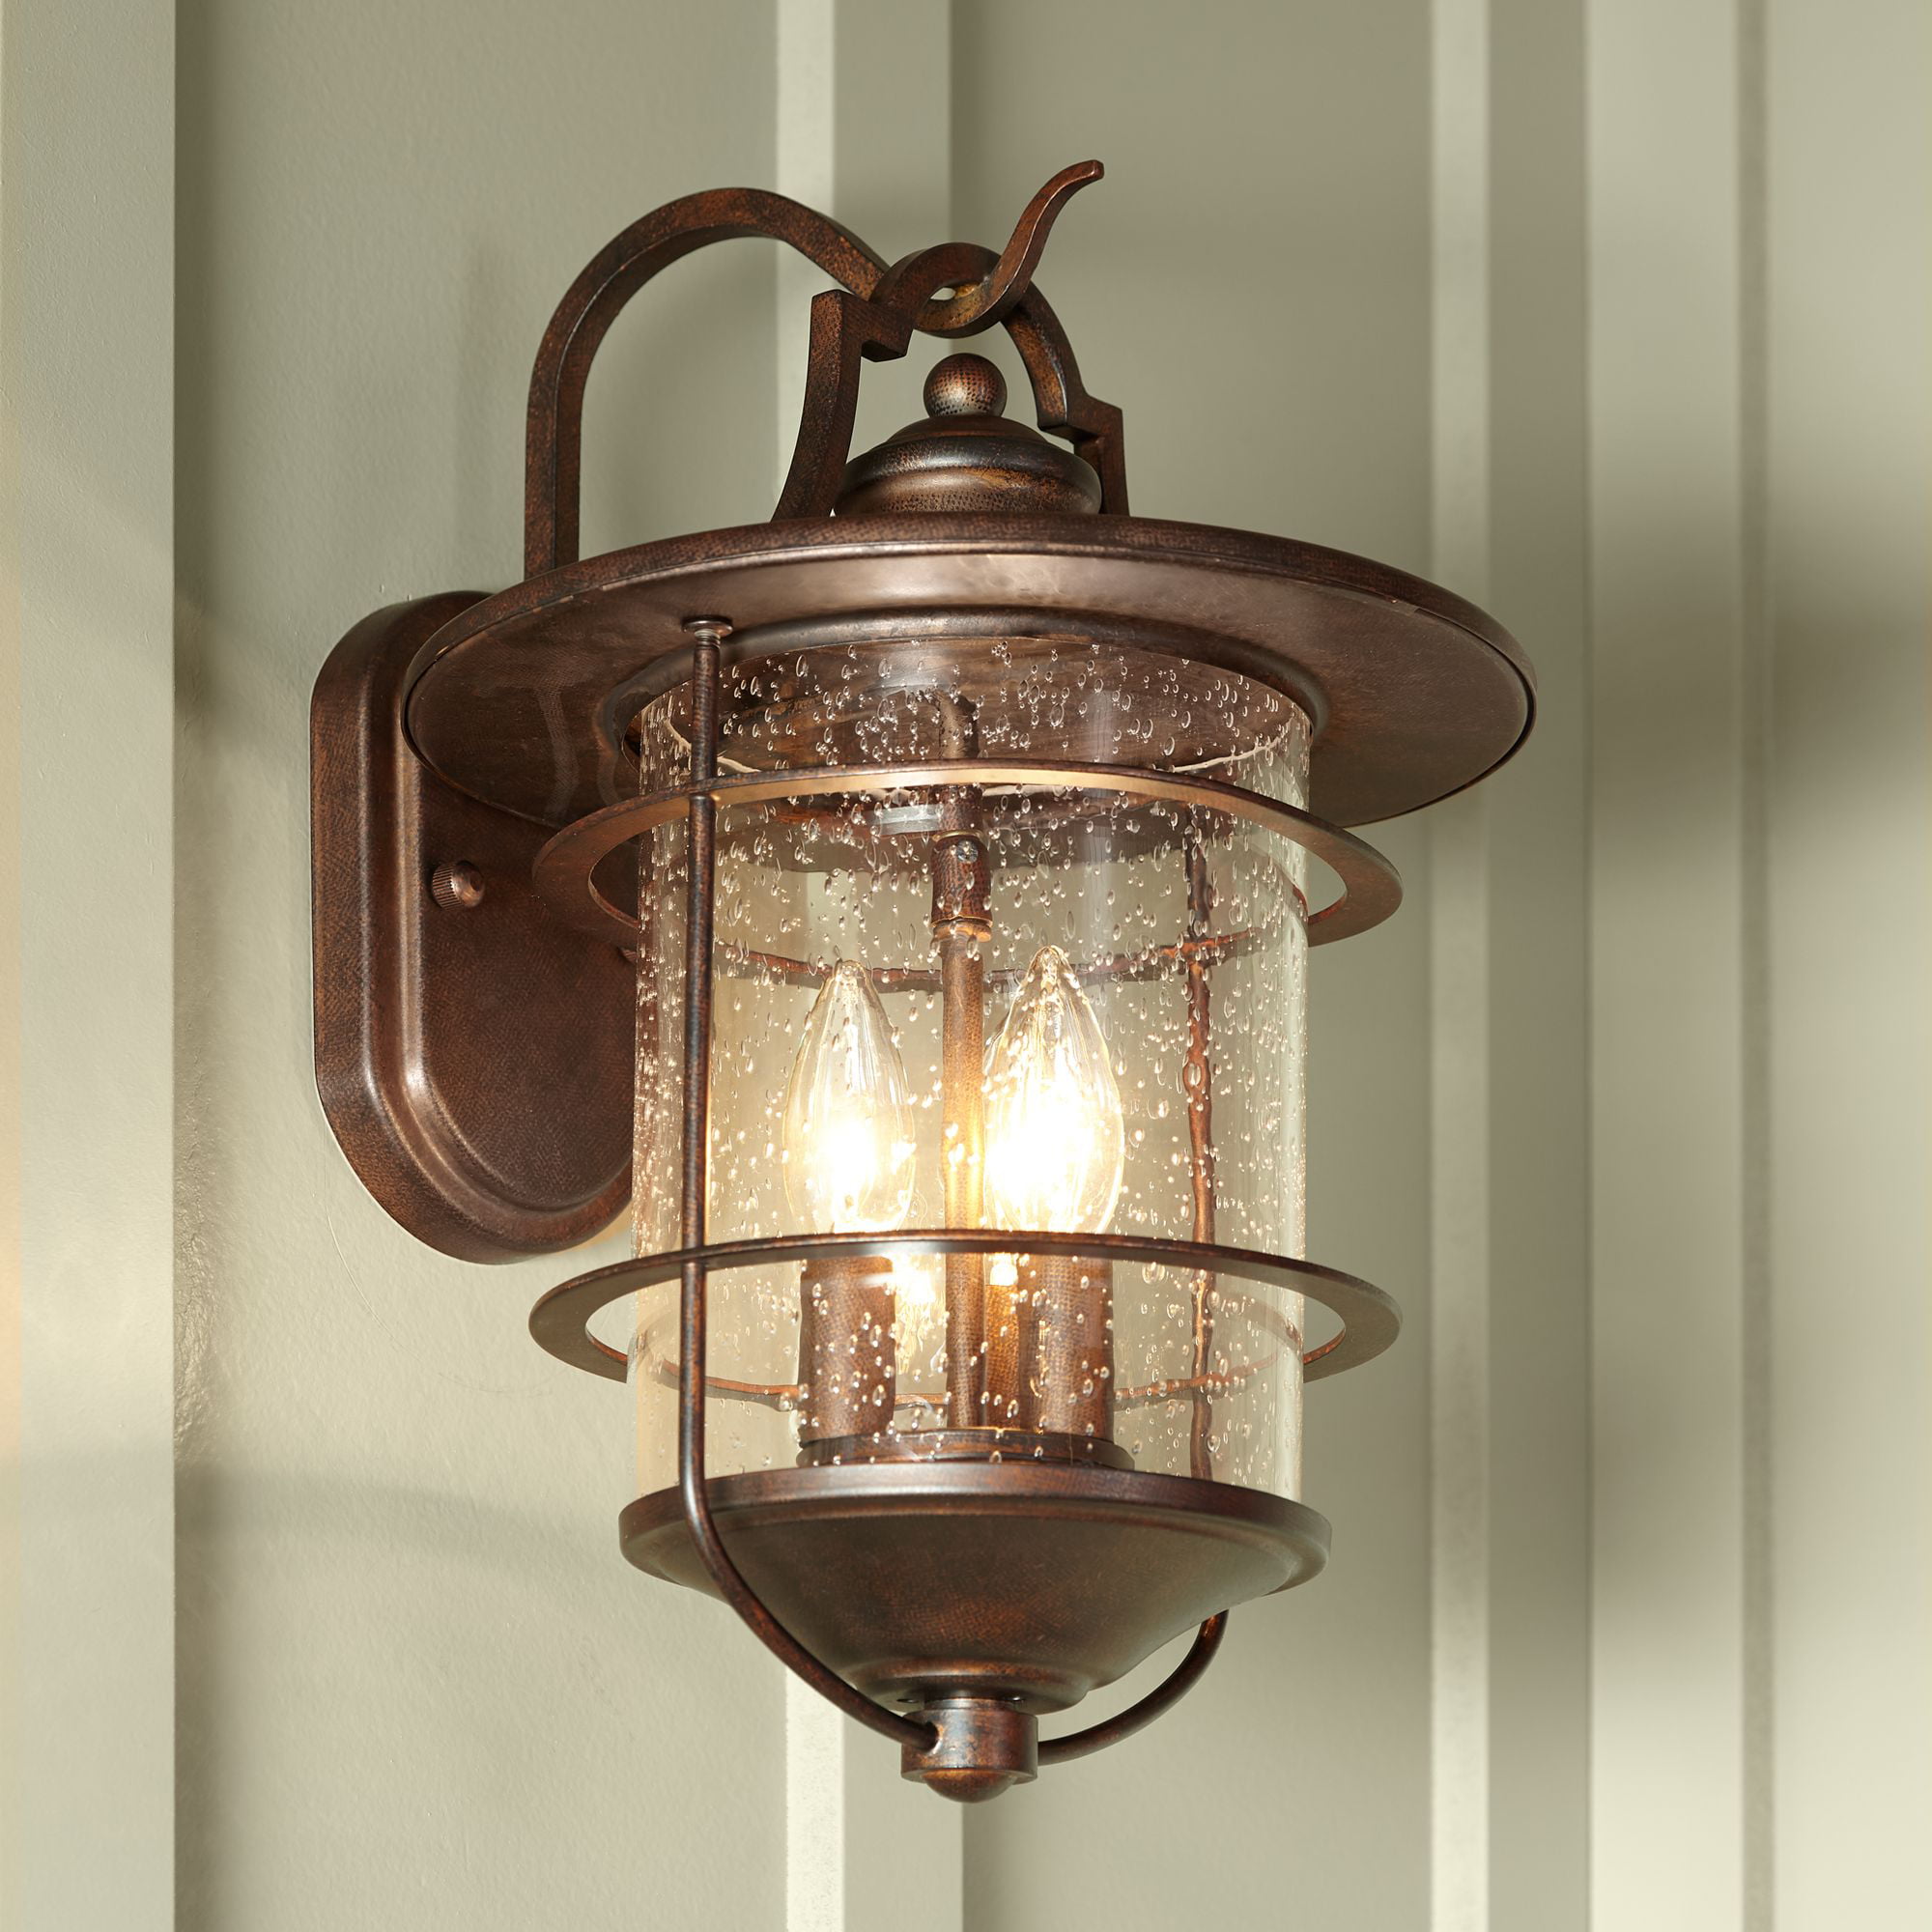 Clear Seedy Glass Lantern, Rustic Outdoor Porch Lights